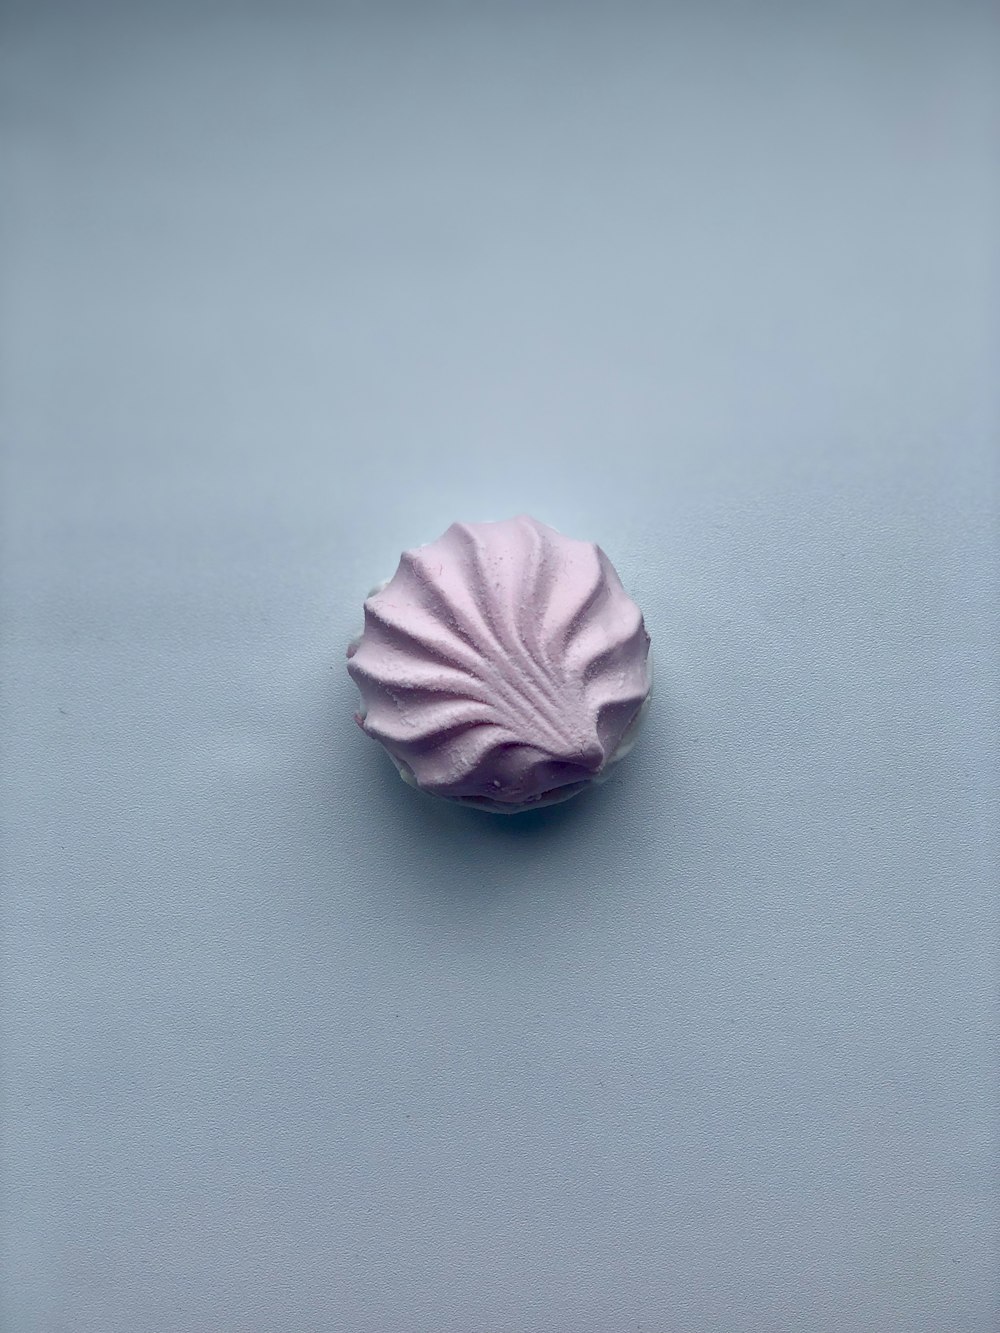 a pink object on a blue background